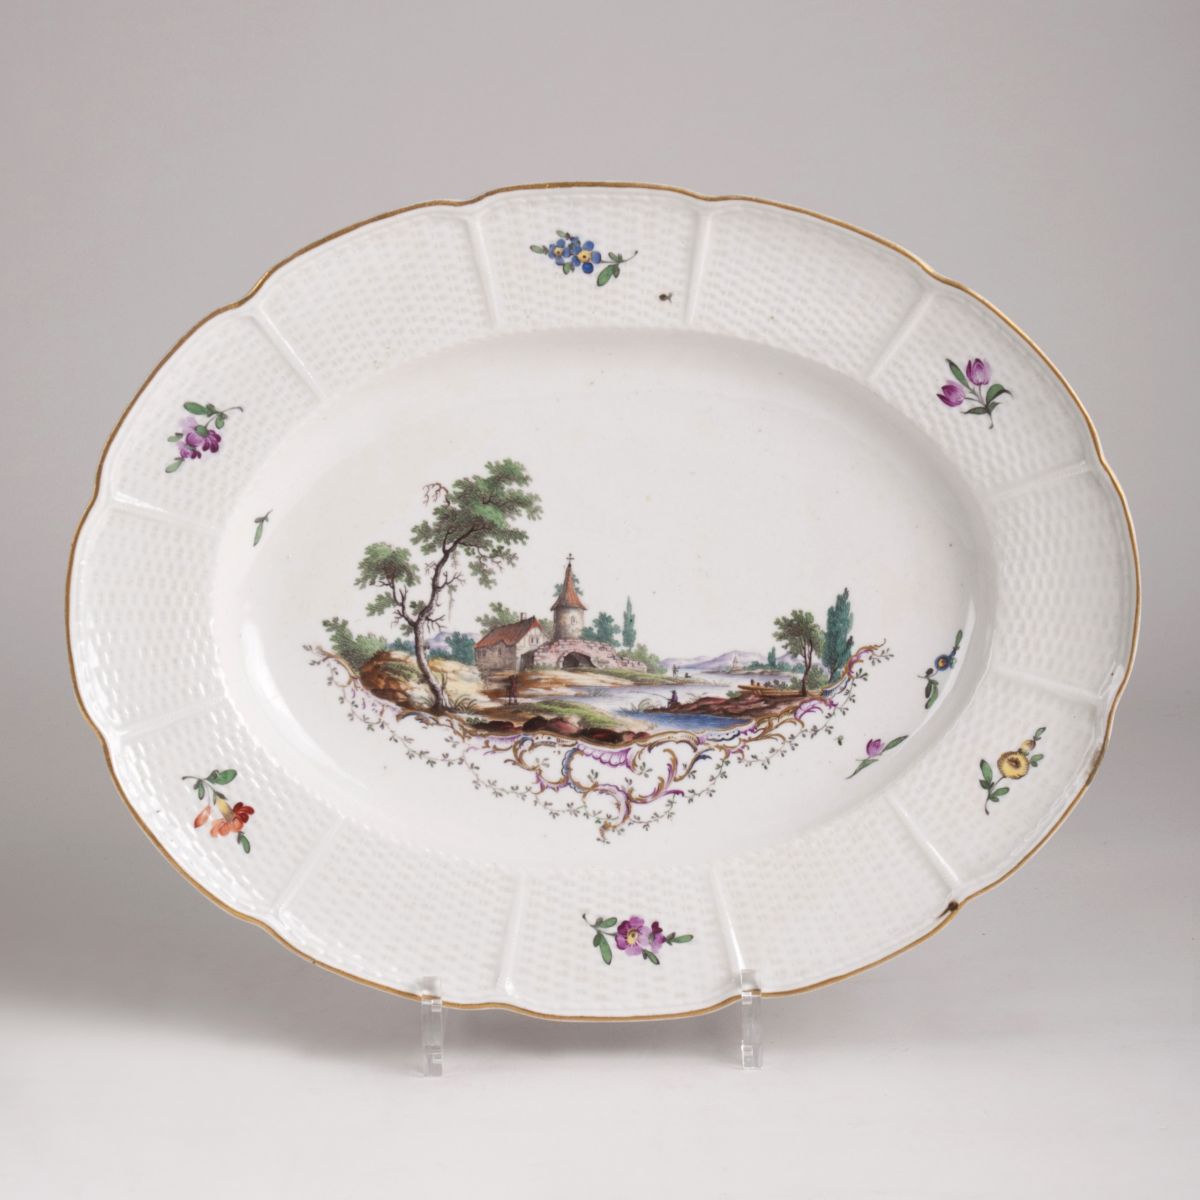 A Ludwigsburg platter with landscape painting